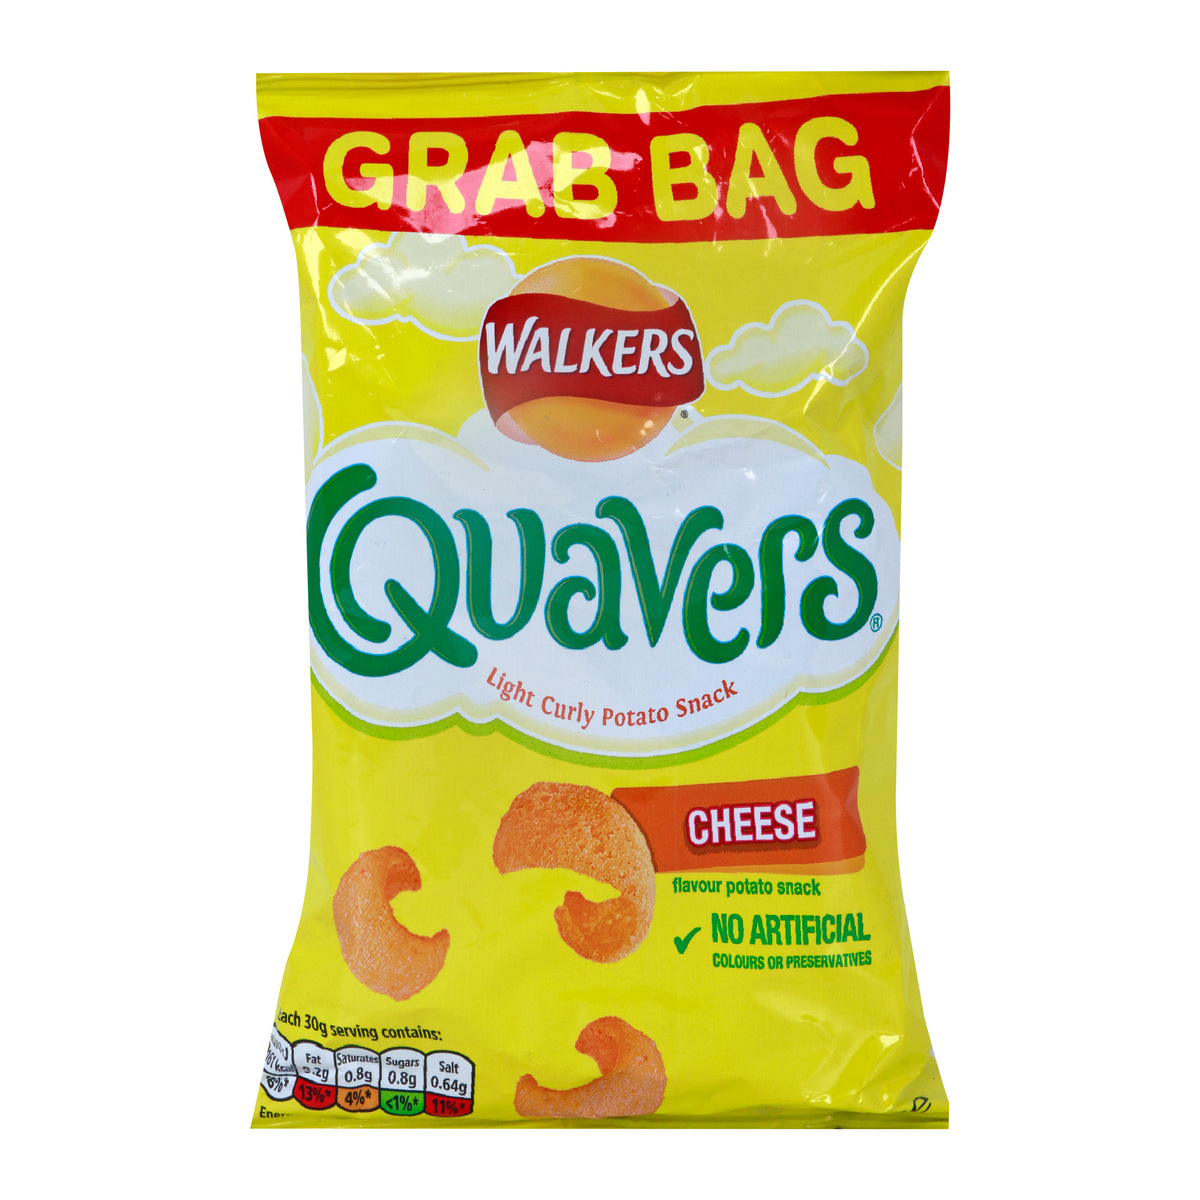 Walkers Quavers Curly Potato Snack Cheese Chips 34g